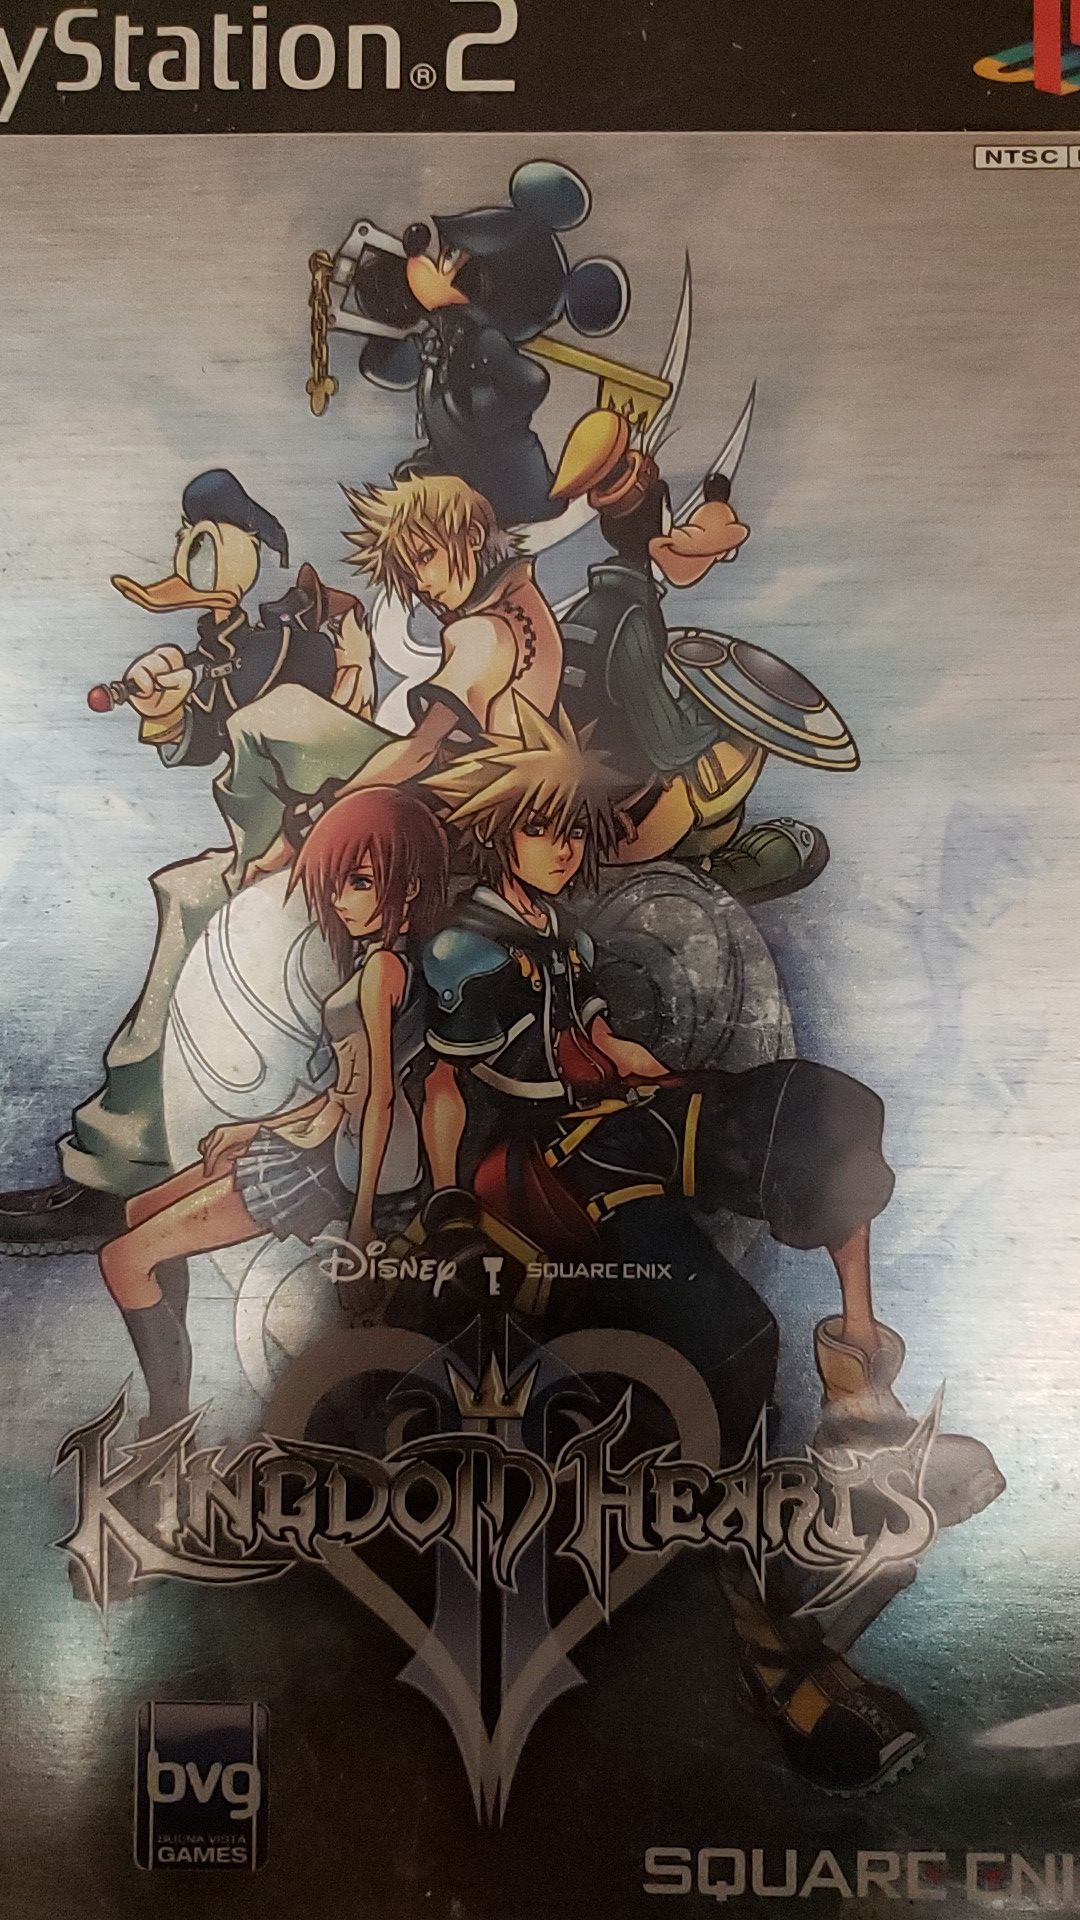 Kingdom Hearts II for the ps2